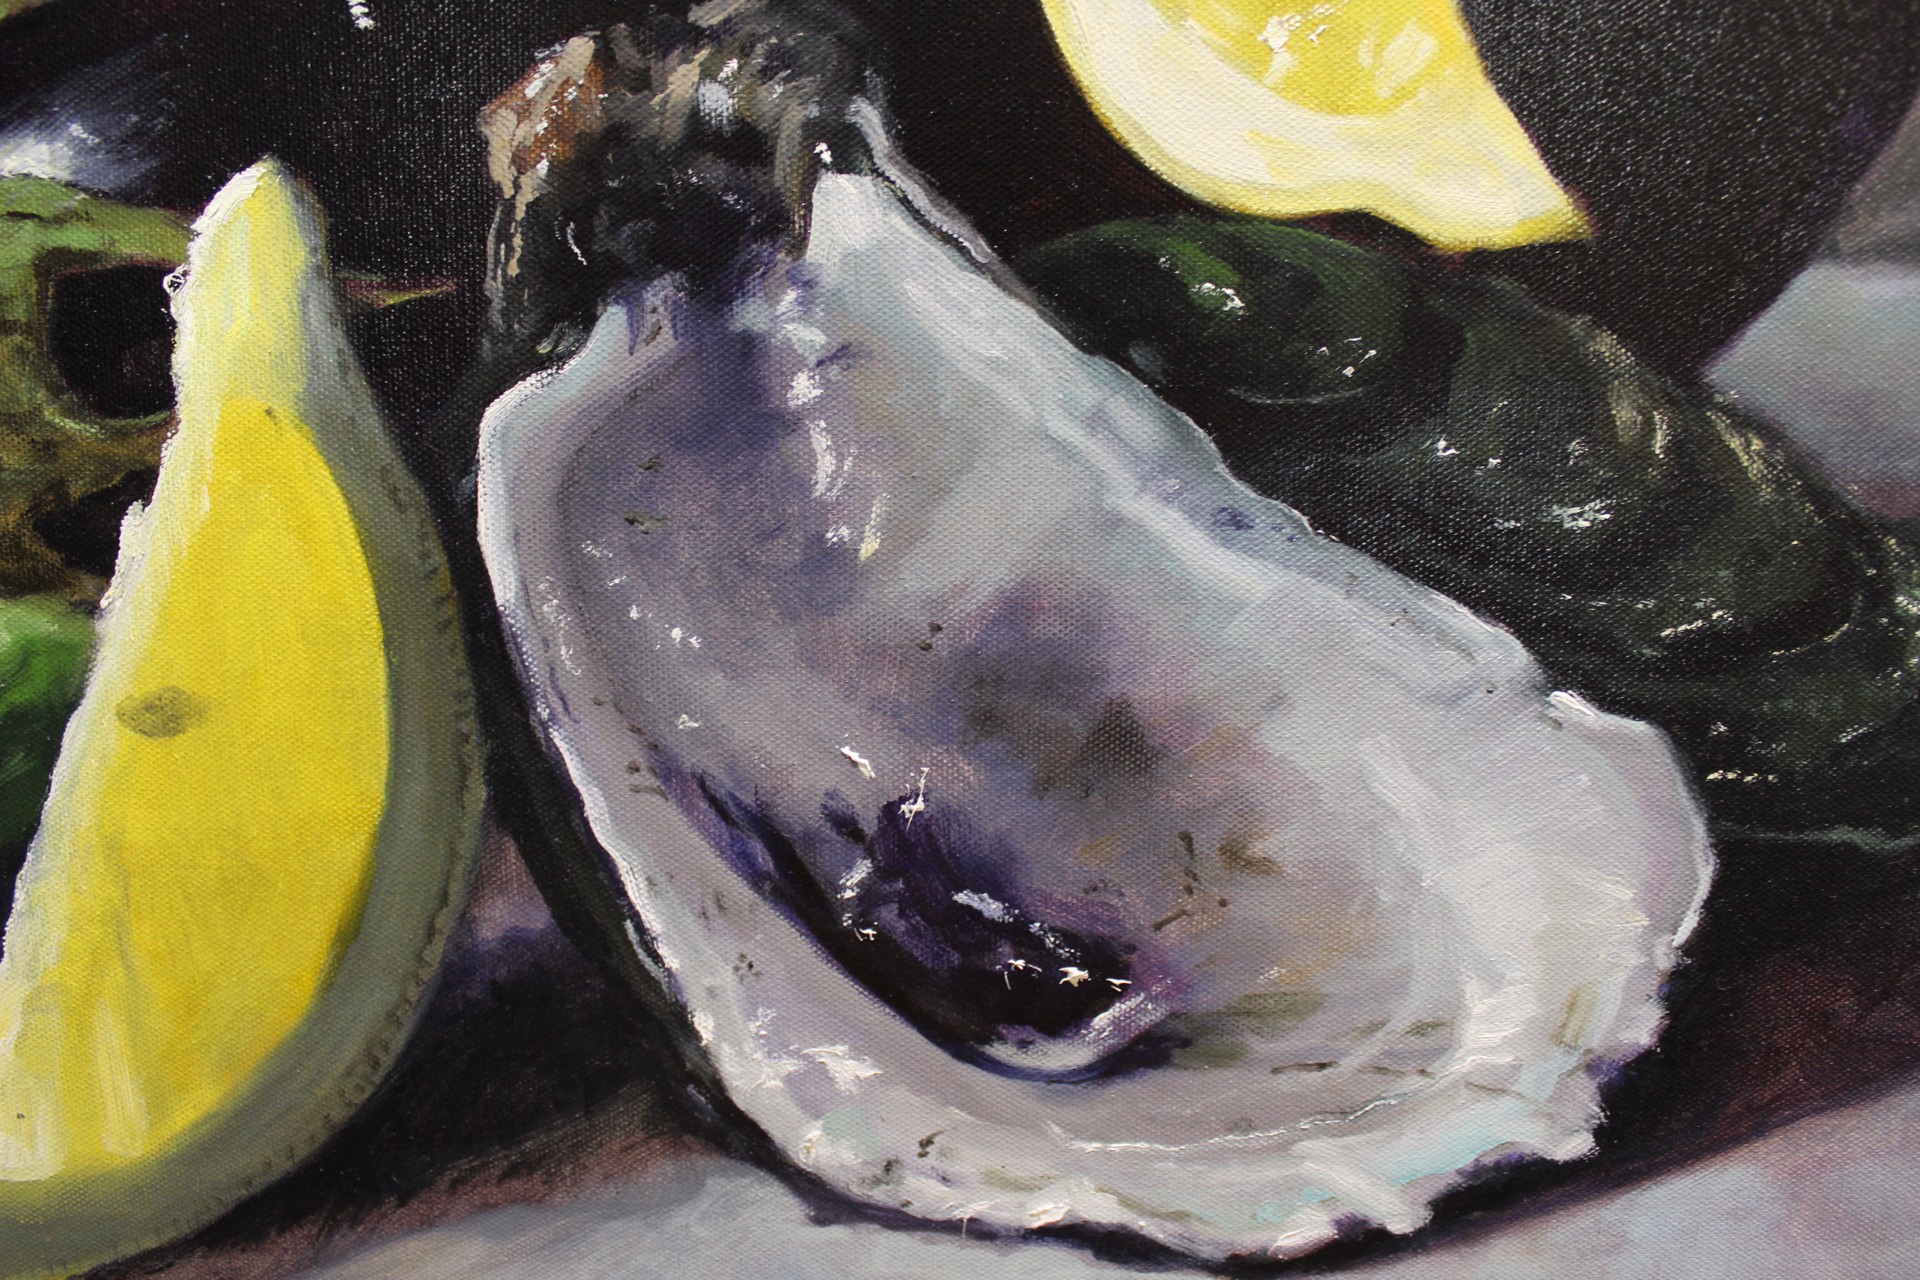 Eggplant & Oyster Shell by Billy Solitario